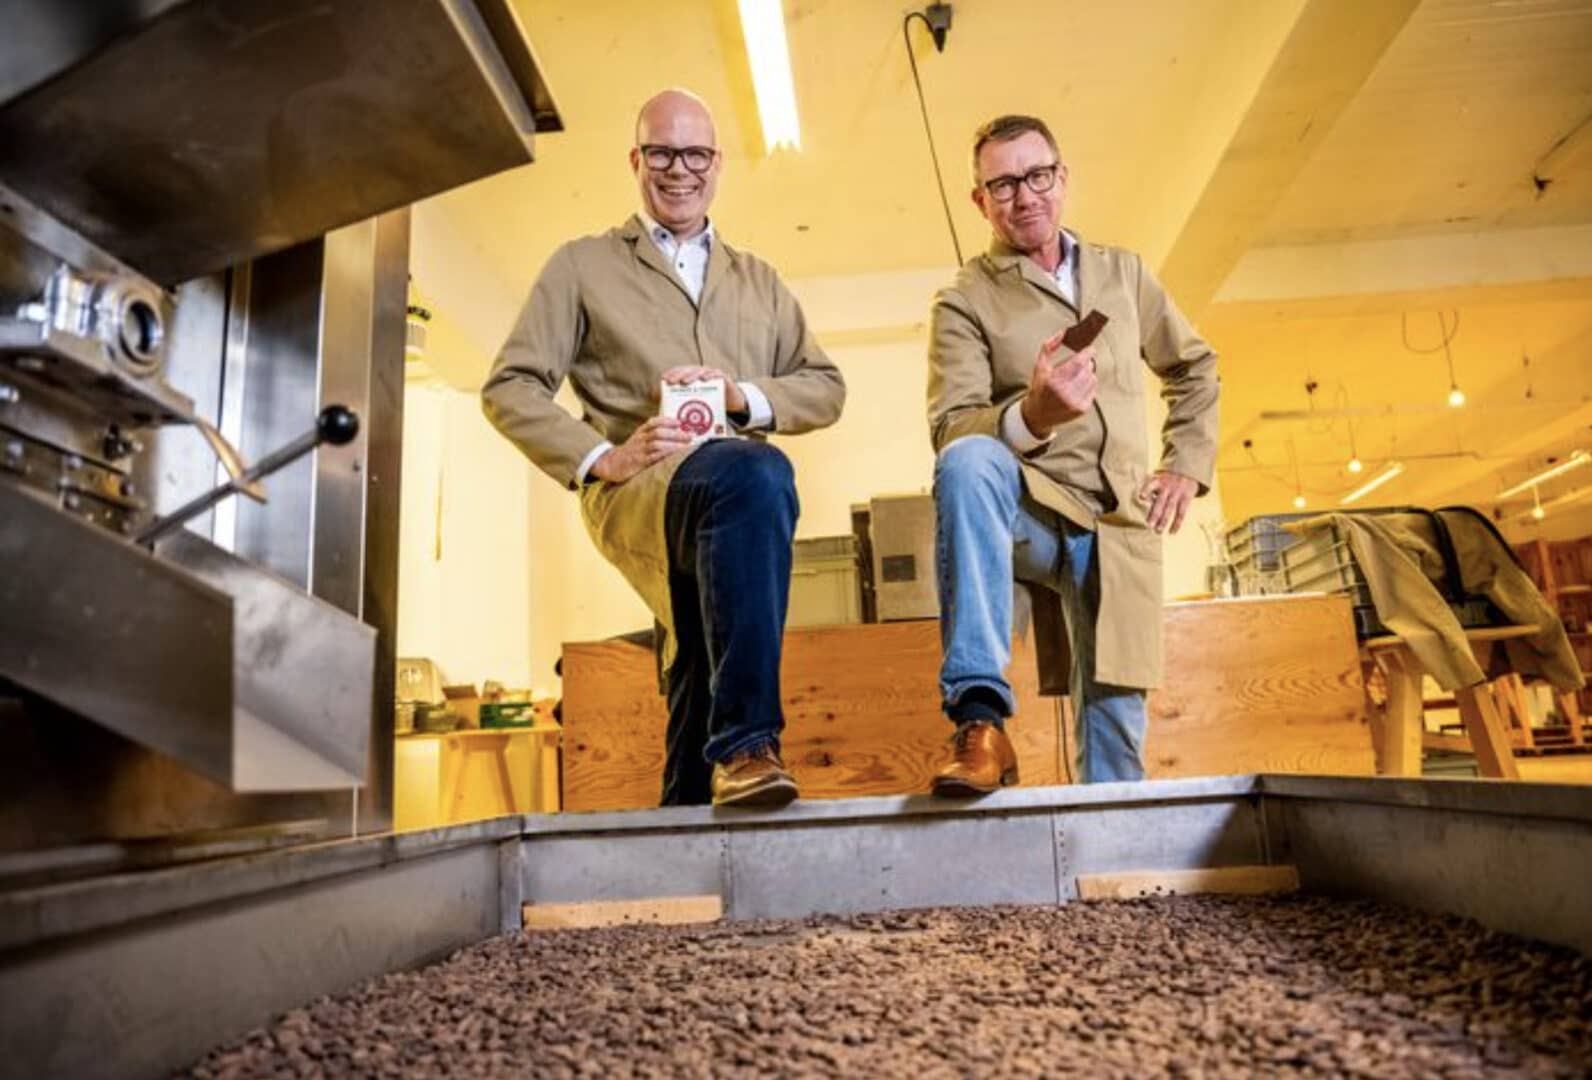 Co-founders, Ewald and Jan Willem at their Chocolate Factory in Rotterdam